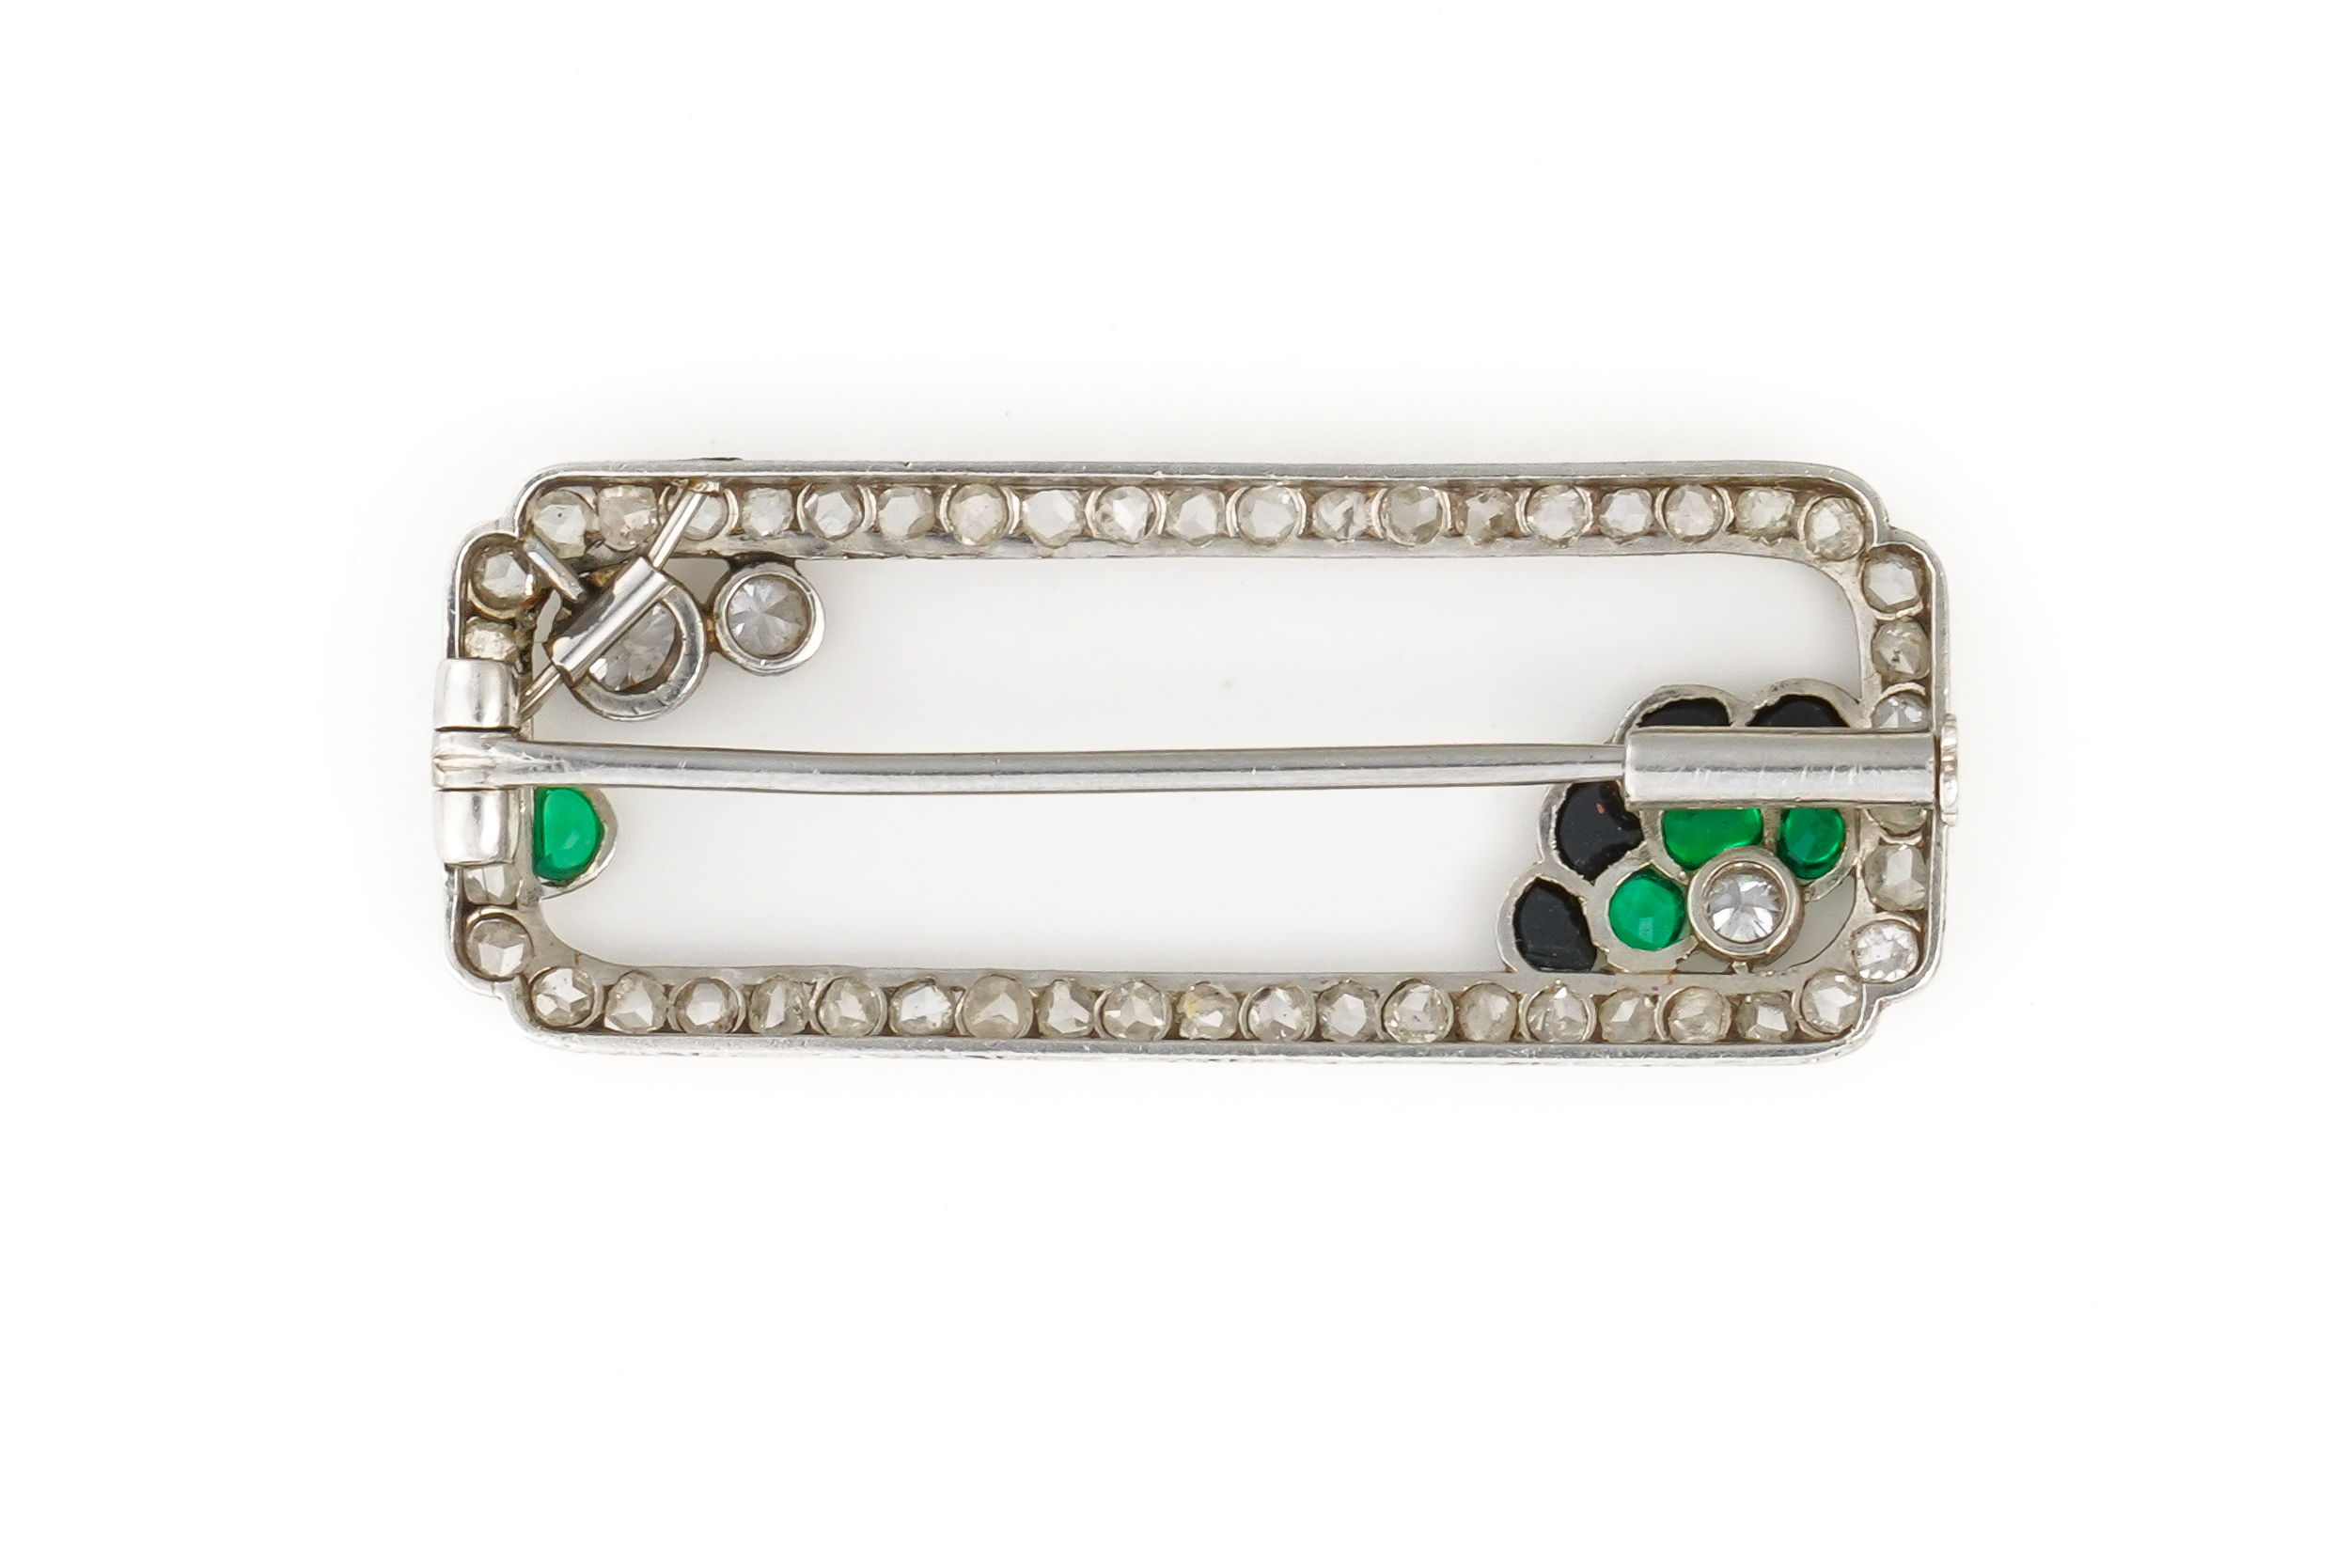 AN ART DECO DIAMOND, PASTE AND ONYX BROOCH - Image 2 of 2